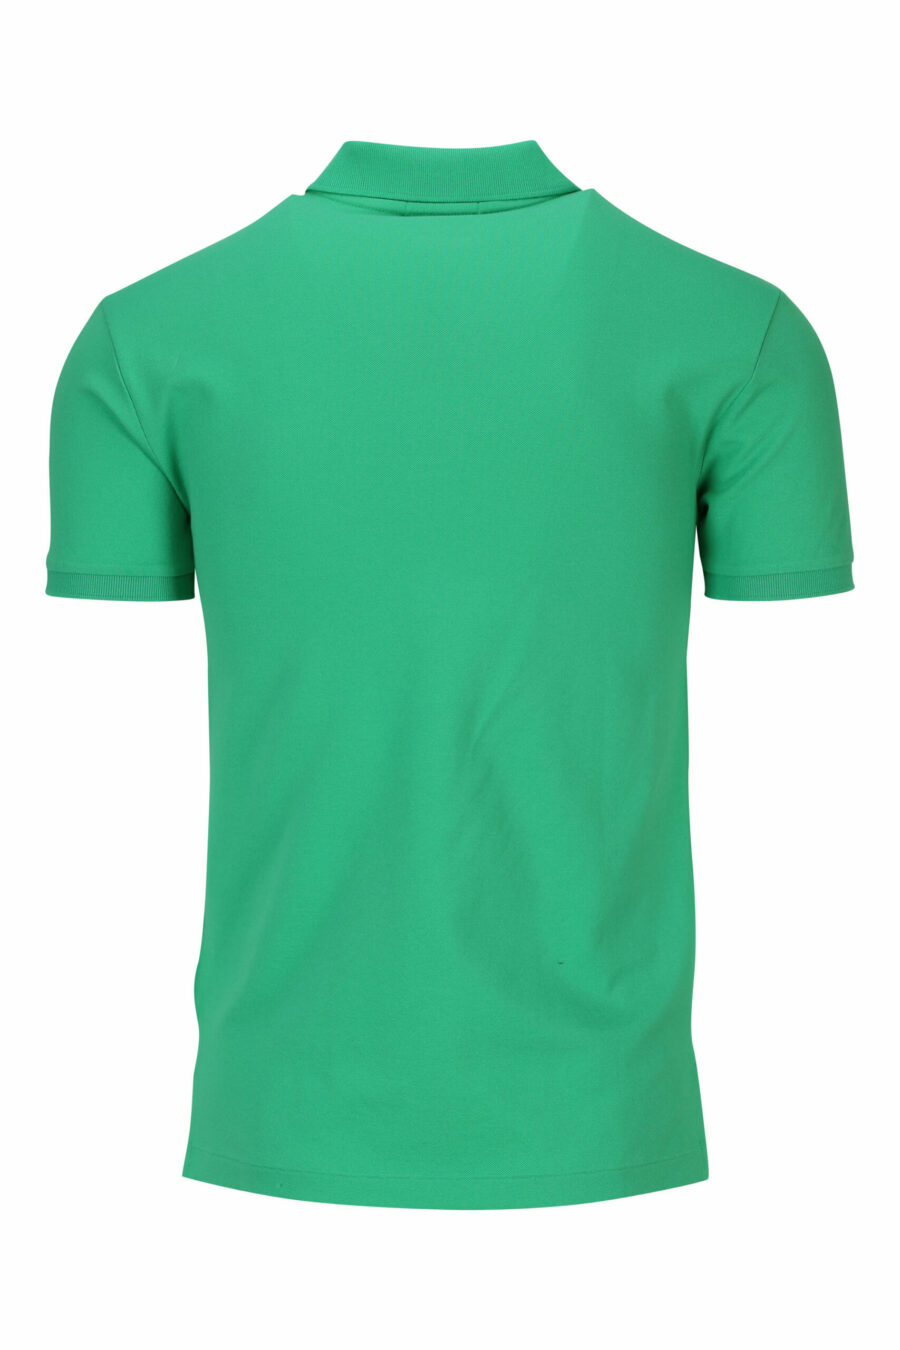 Green and blue T-shirt with mini-logo "polo" - 3616535909687 1 scaled